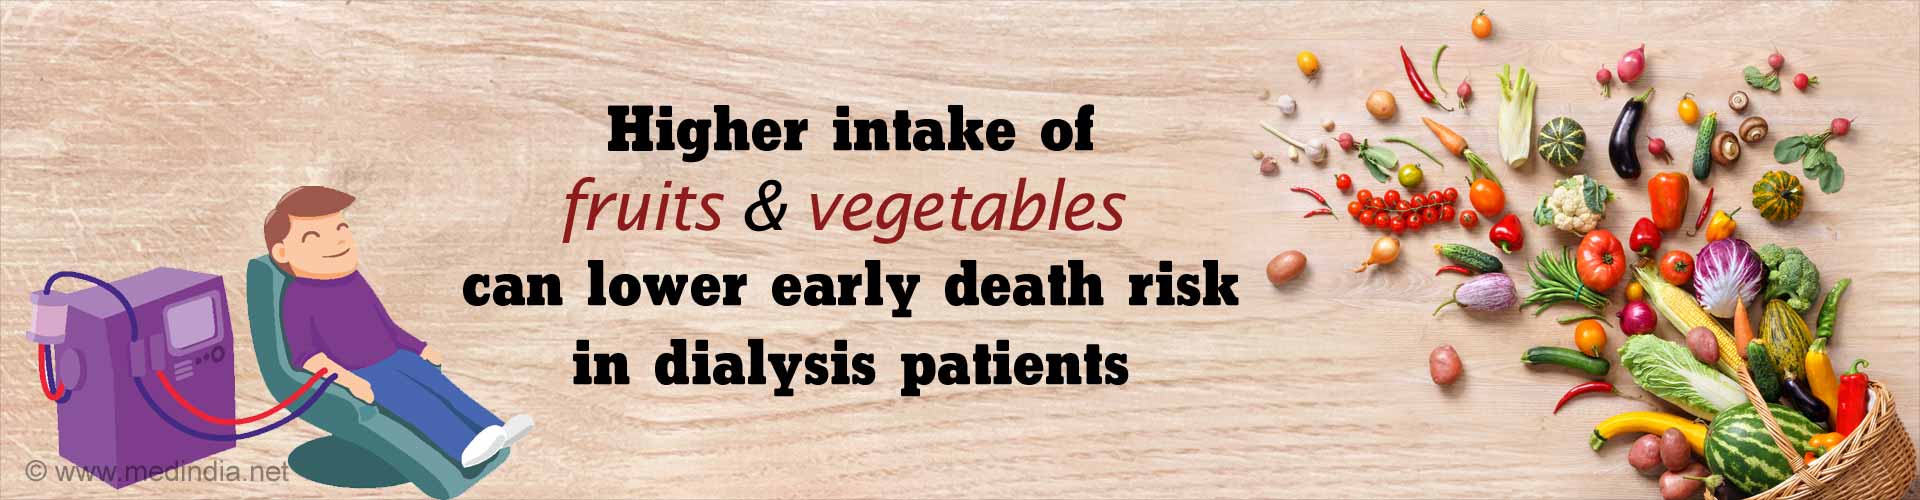 Higher intake of fruits and vegetables can lower early death risk in dialysis patients.
